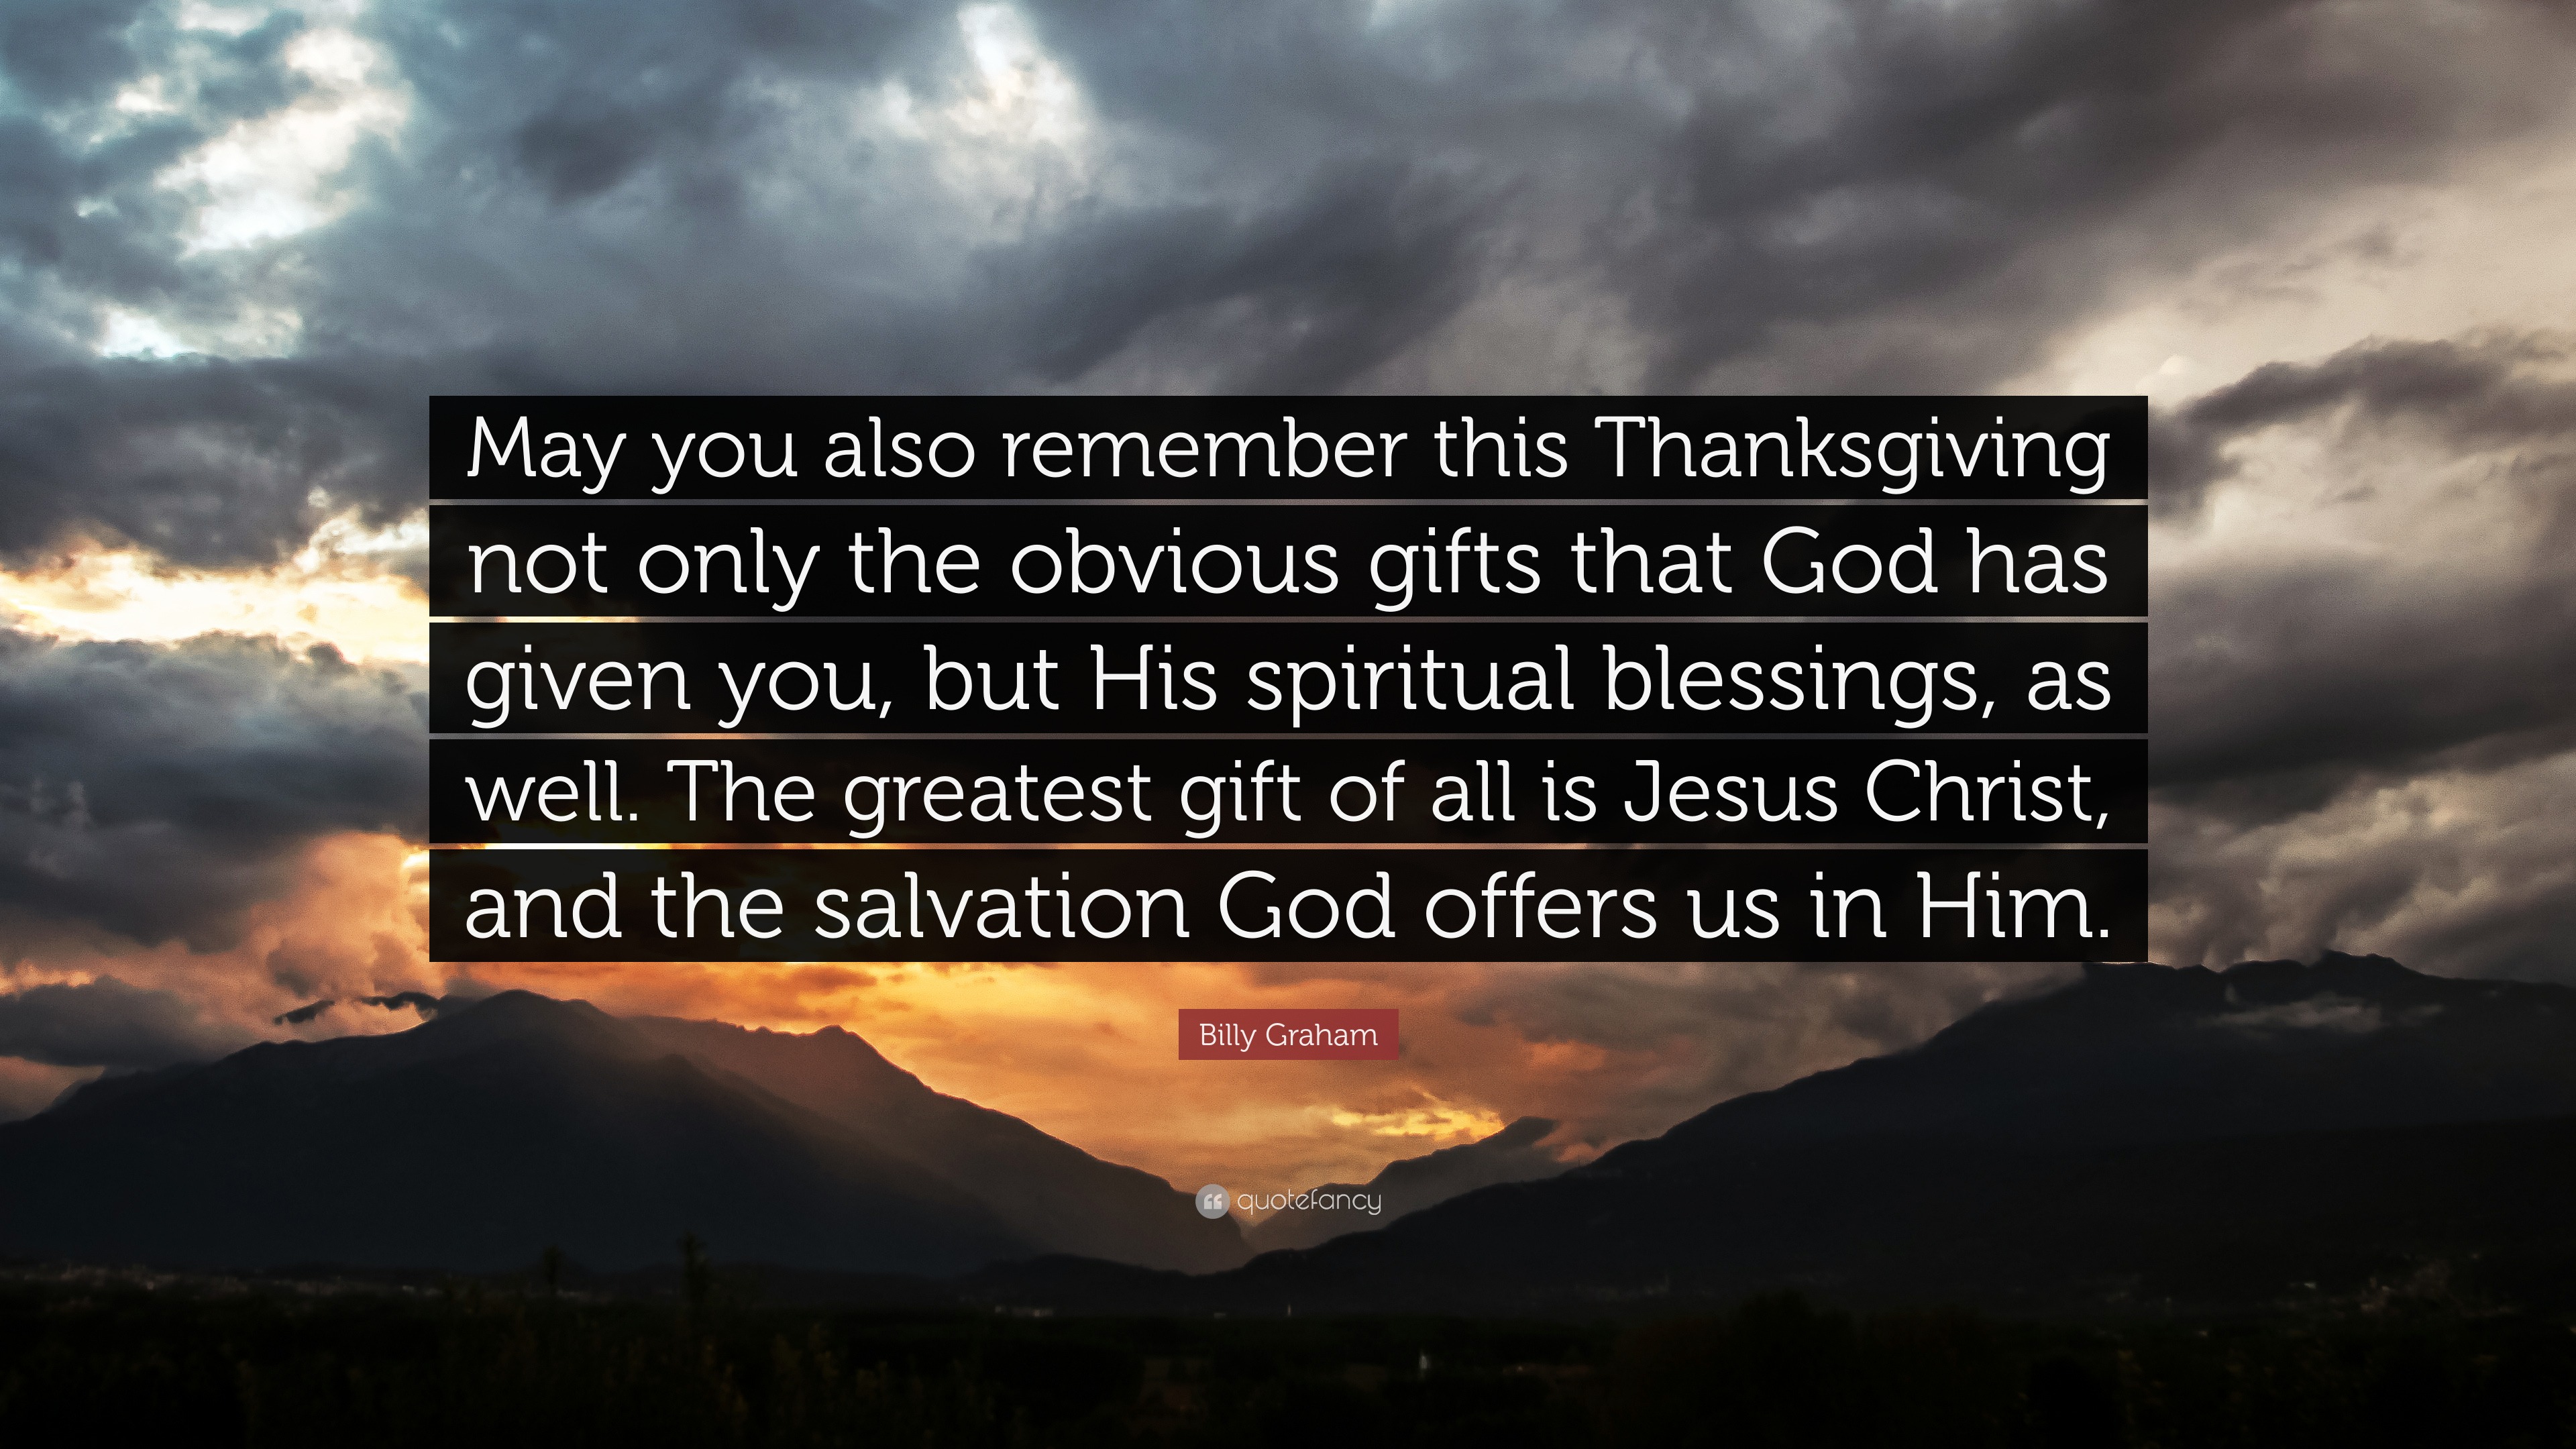 2773360 Billy Graham Quote May you also remember this Thanksgiving not